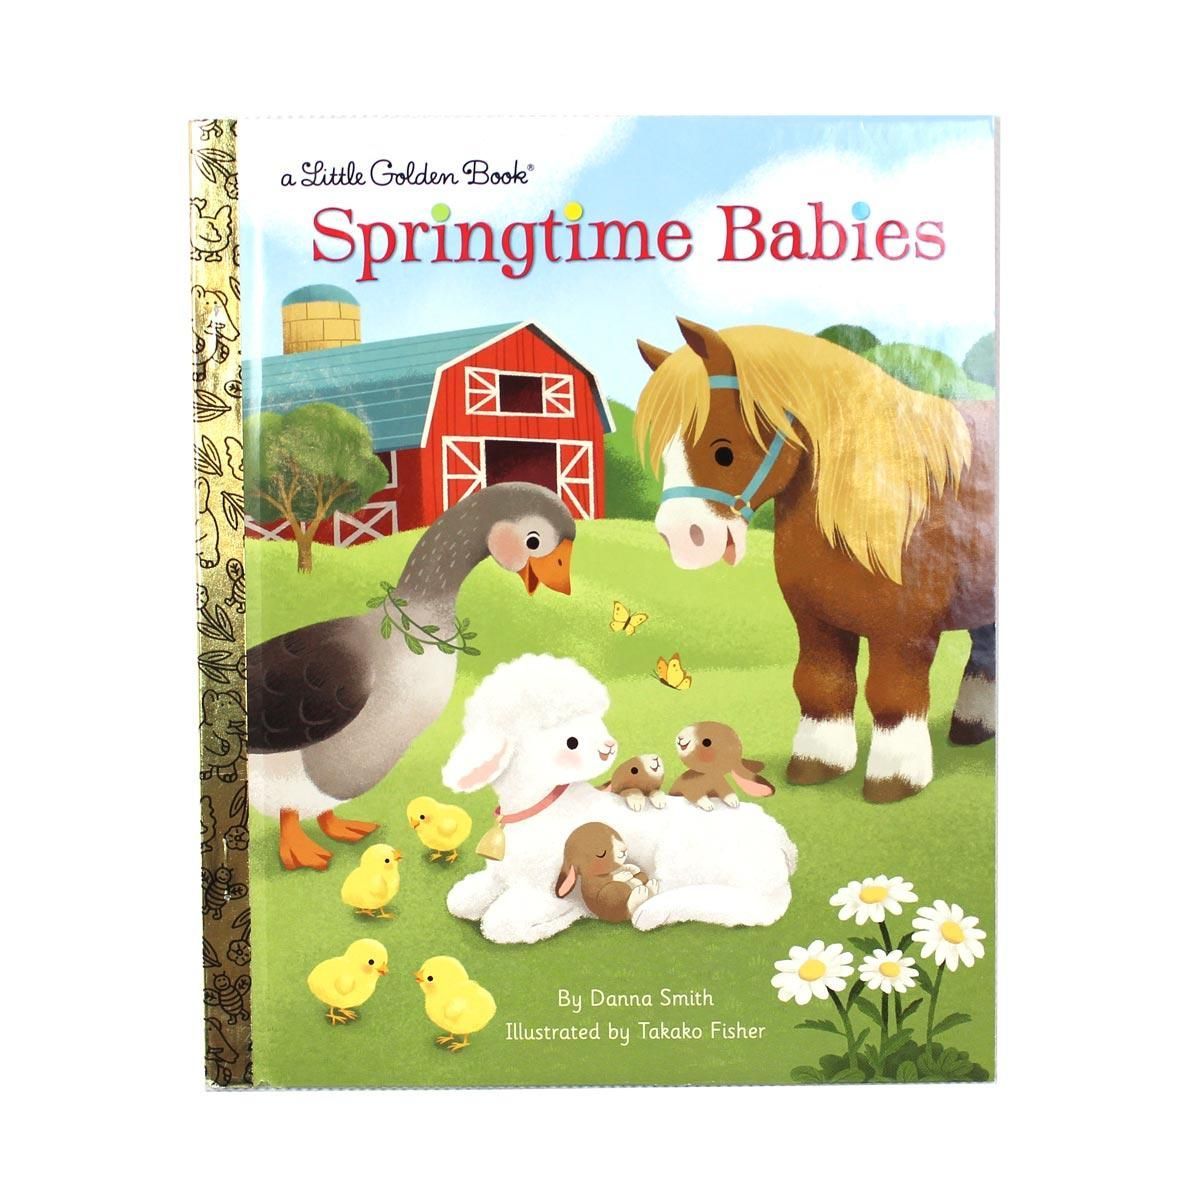 ‘Springtime Babies’ by Danna Smith, illustrated by Takako Fisher